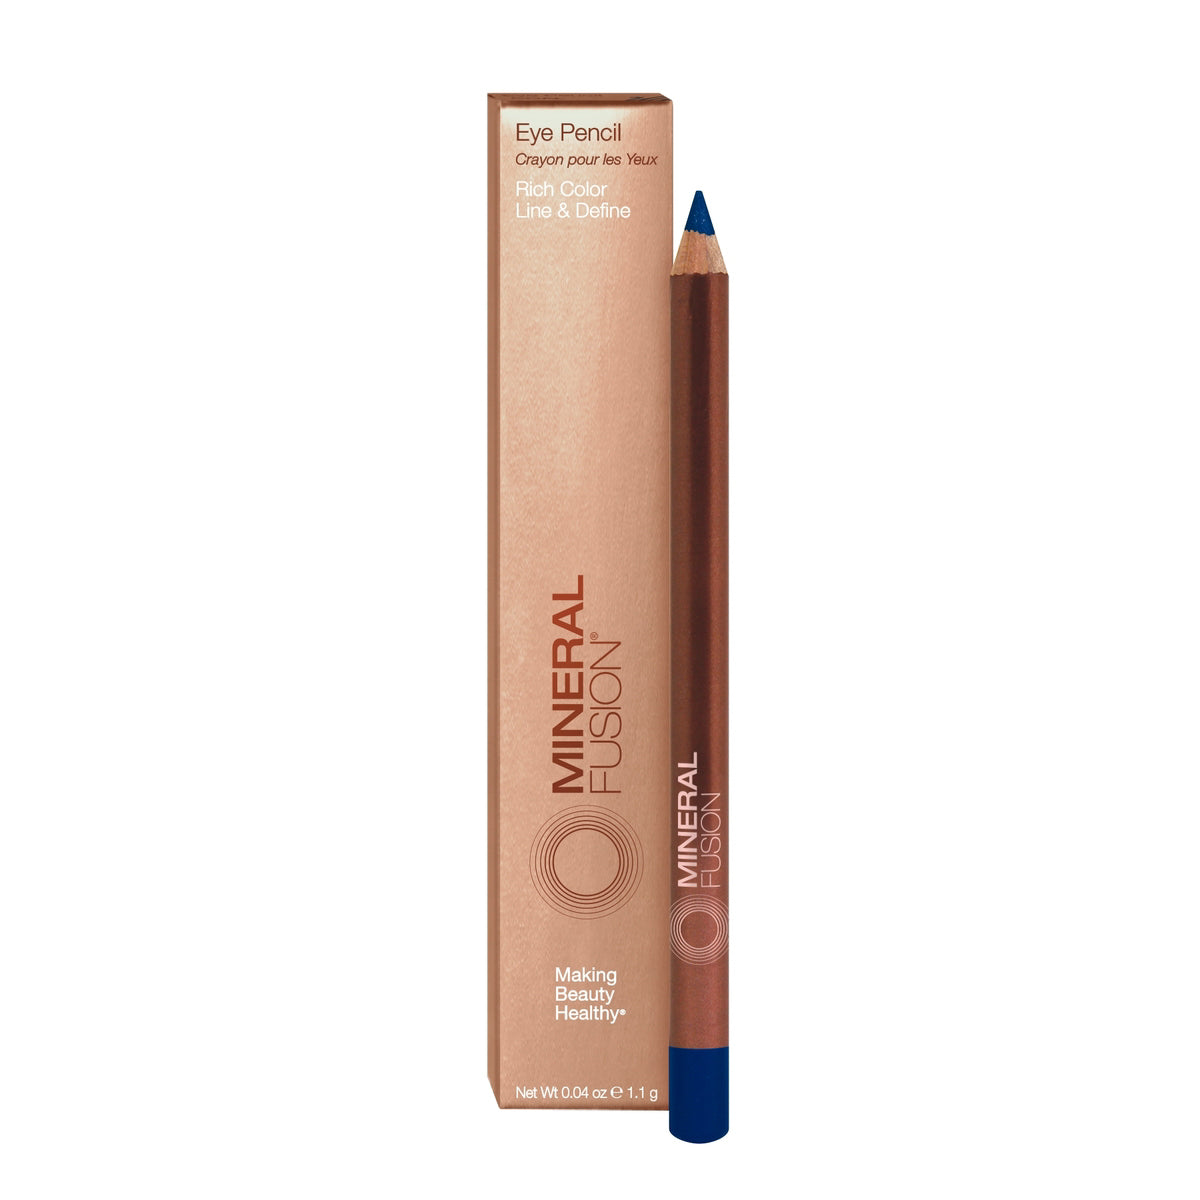 Mineral Fusion - Eye Pencil - Azure - Navy Blue - ProCare Outlet by Mineral Fusion